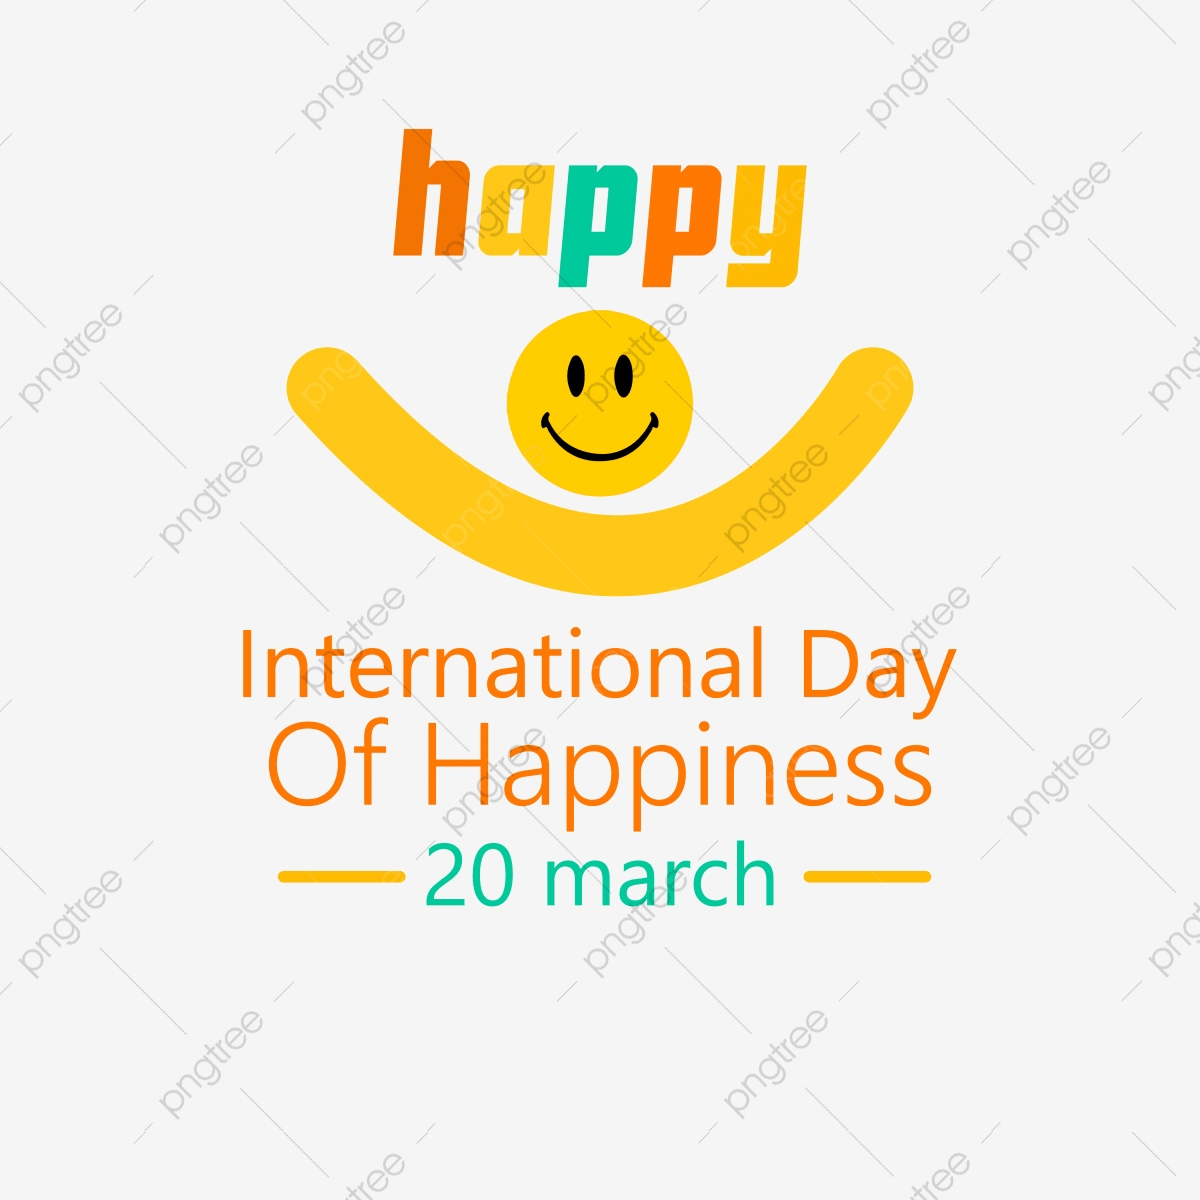 International Day Of Happiness Wallpapers